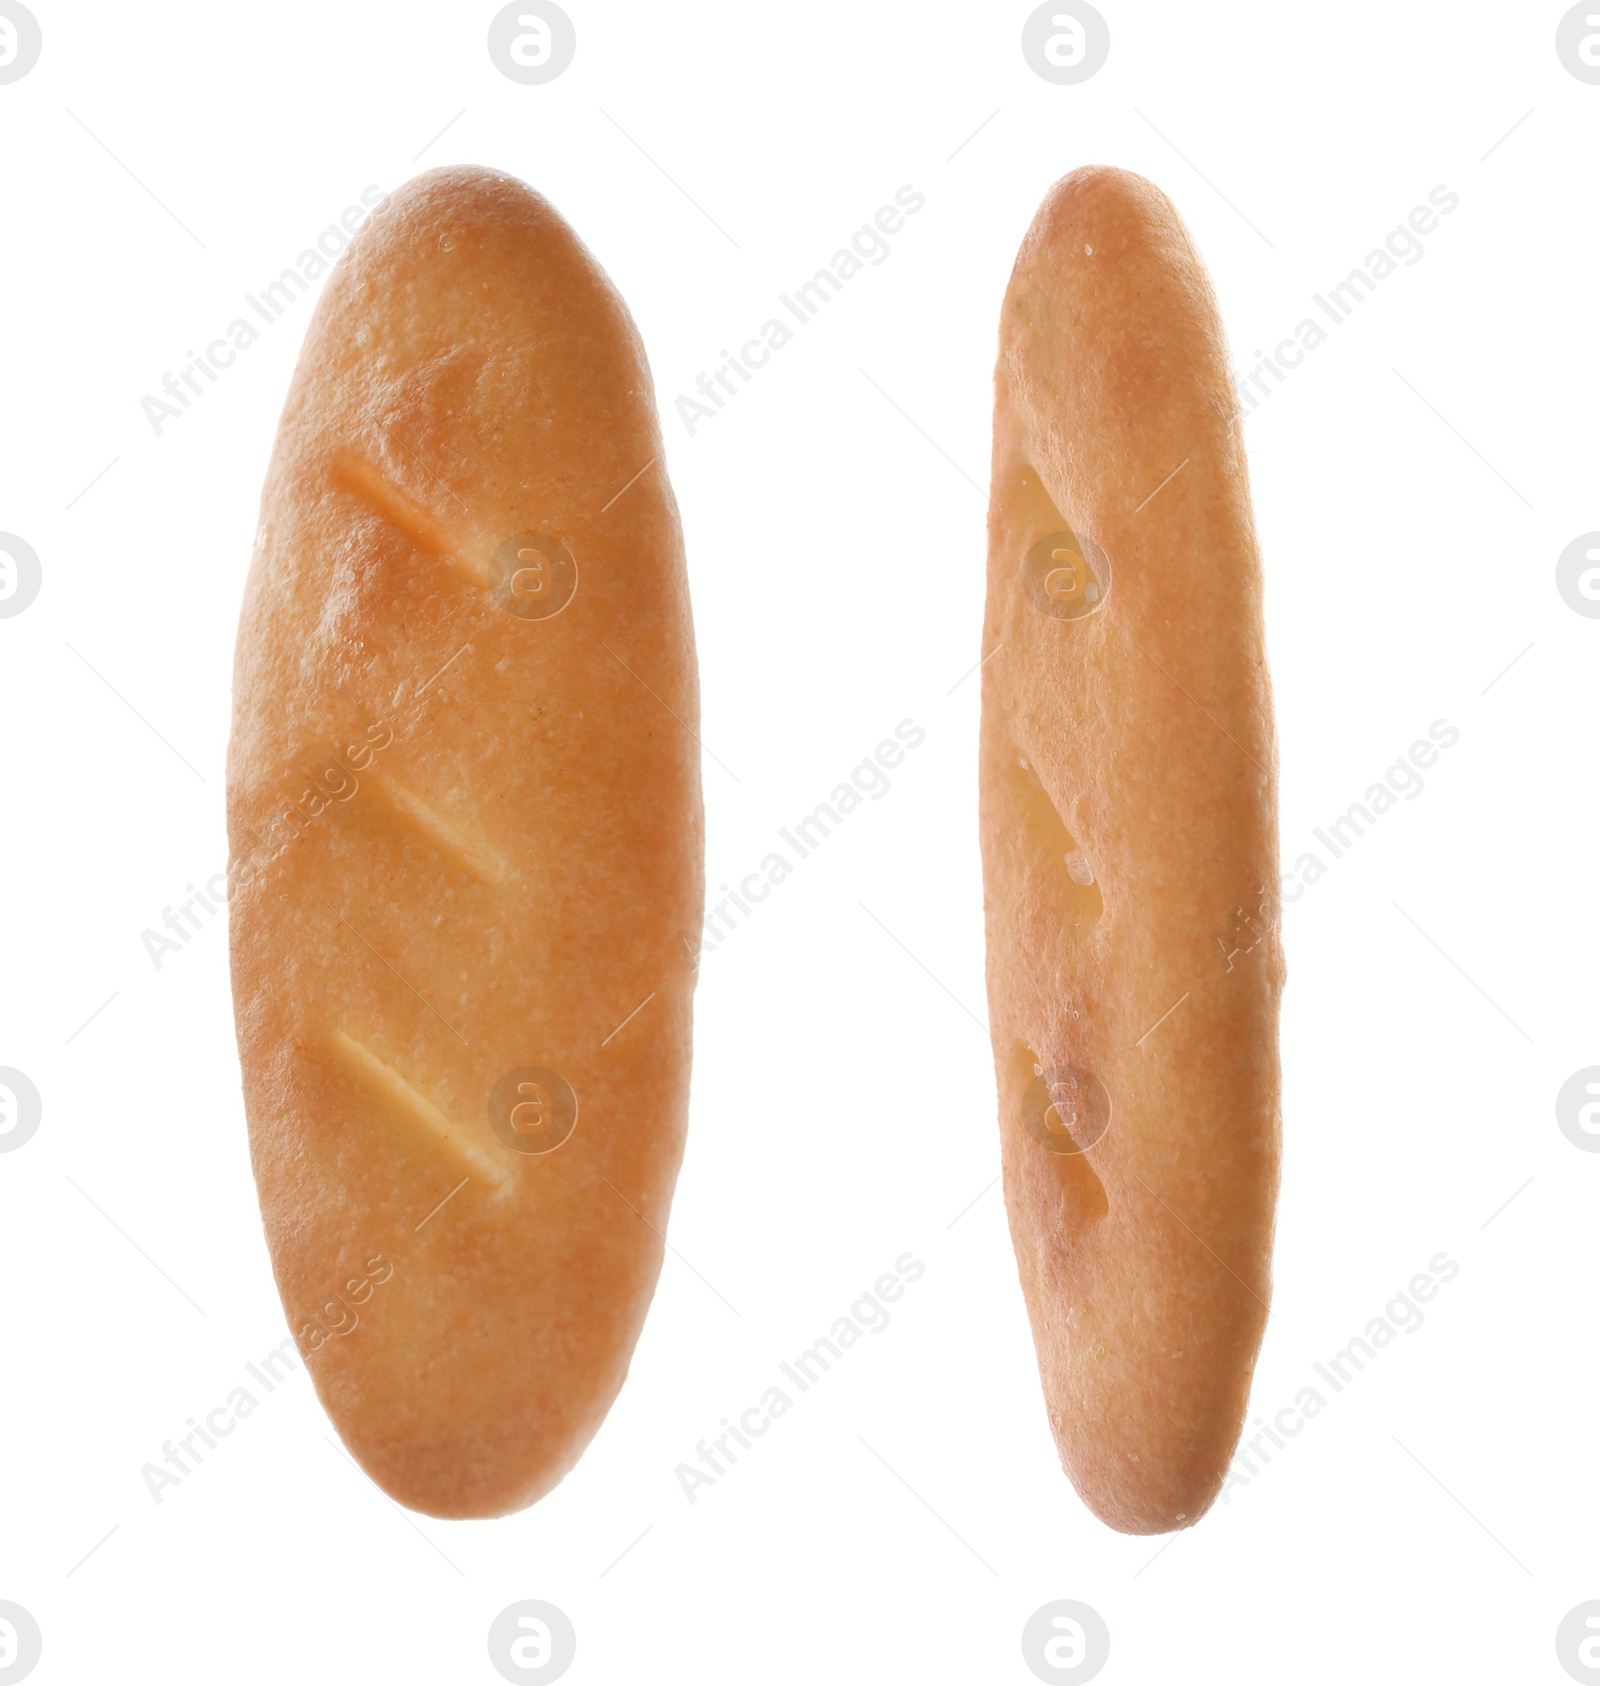 Image of Tasty crispy crackers on white background. Dry biscuit